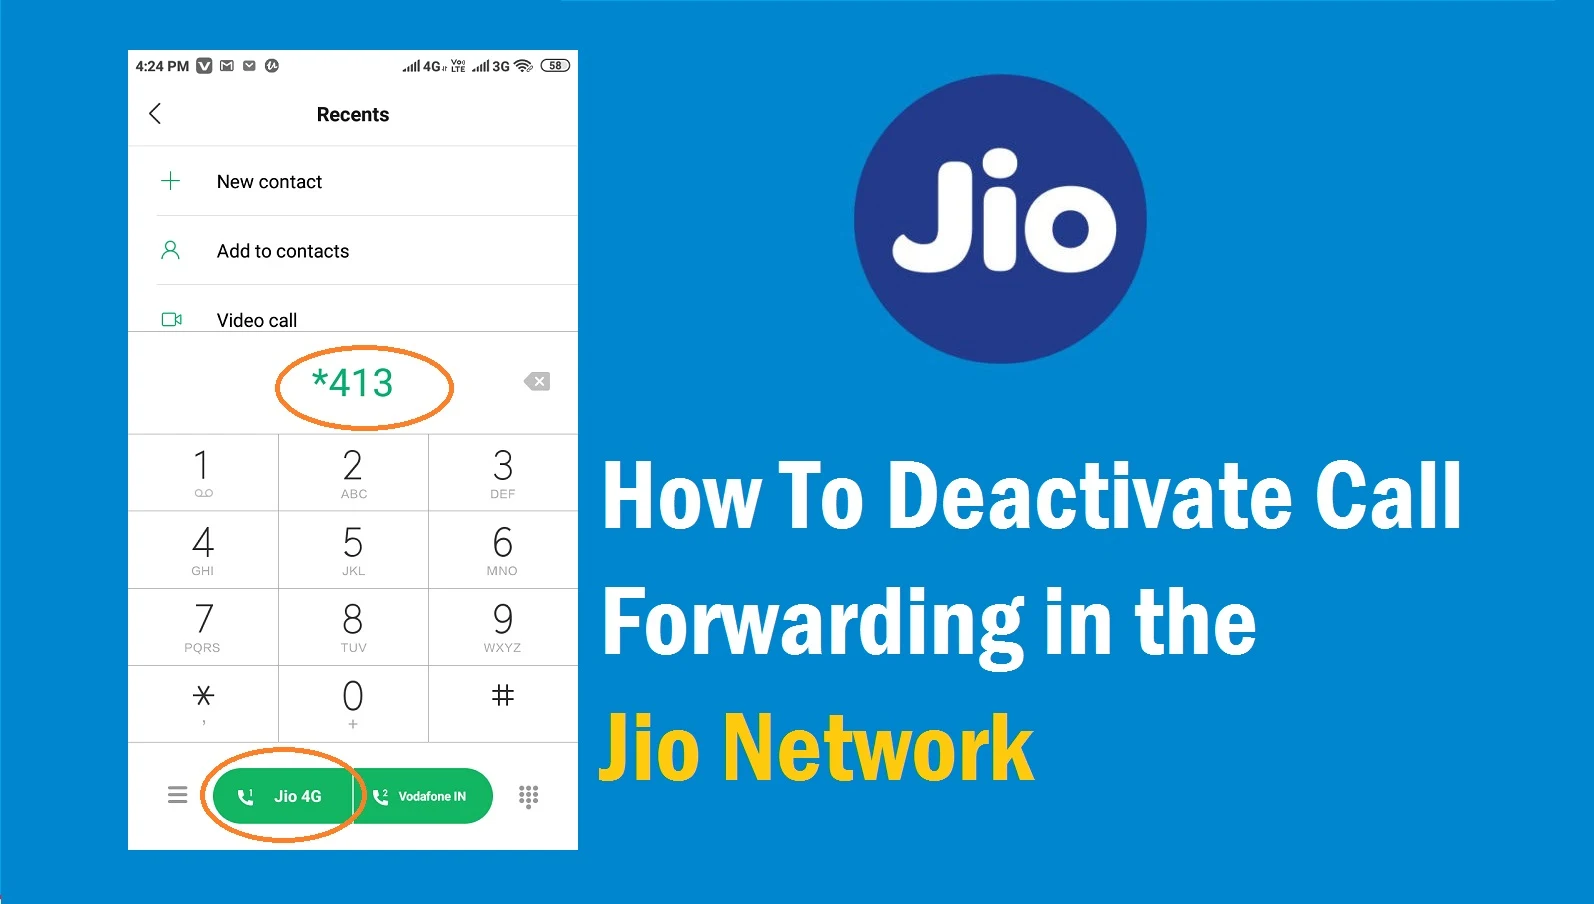 How to deactivate call forwarding in the Jio network